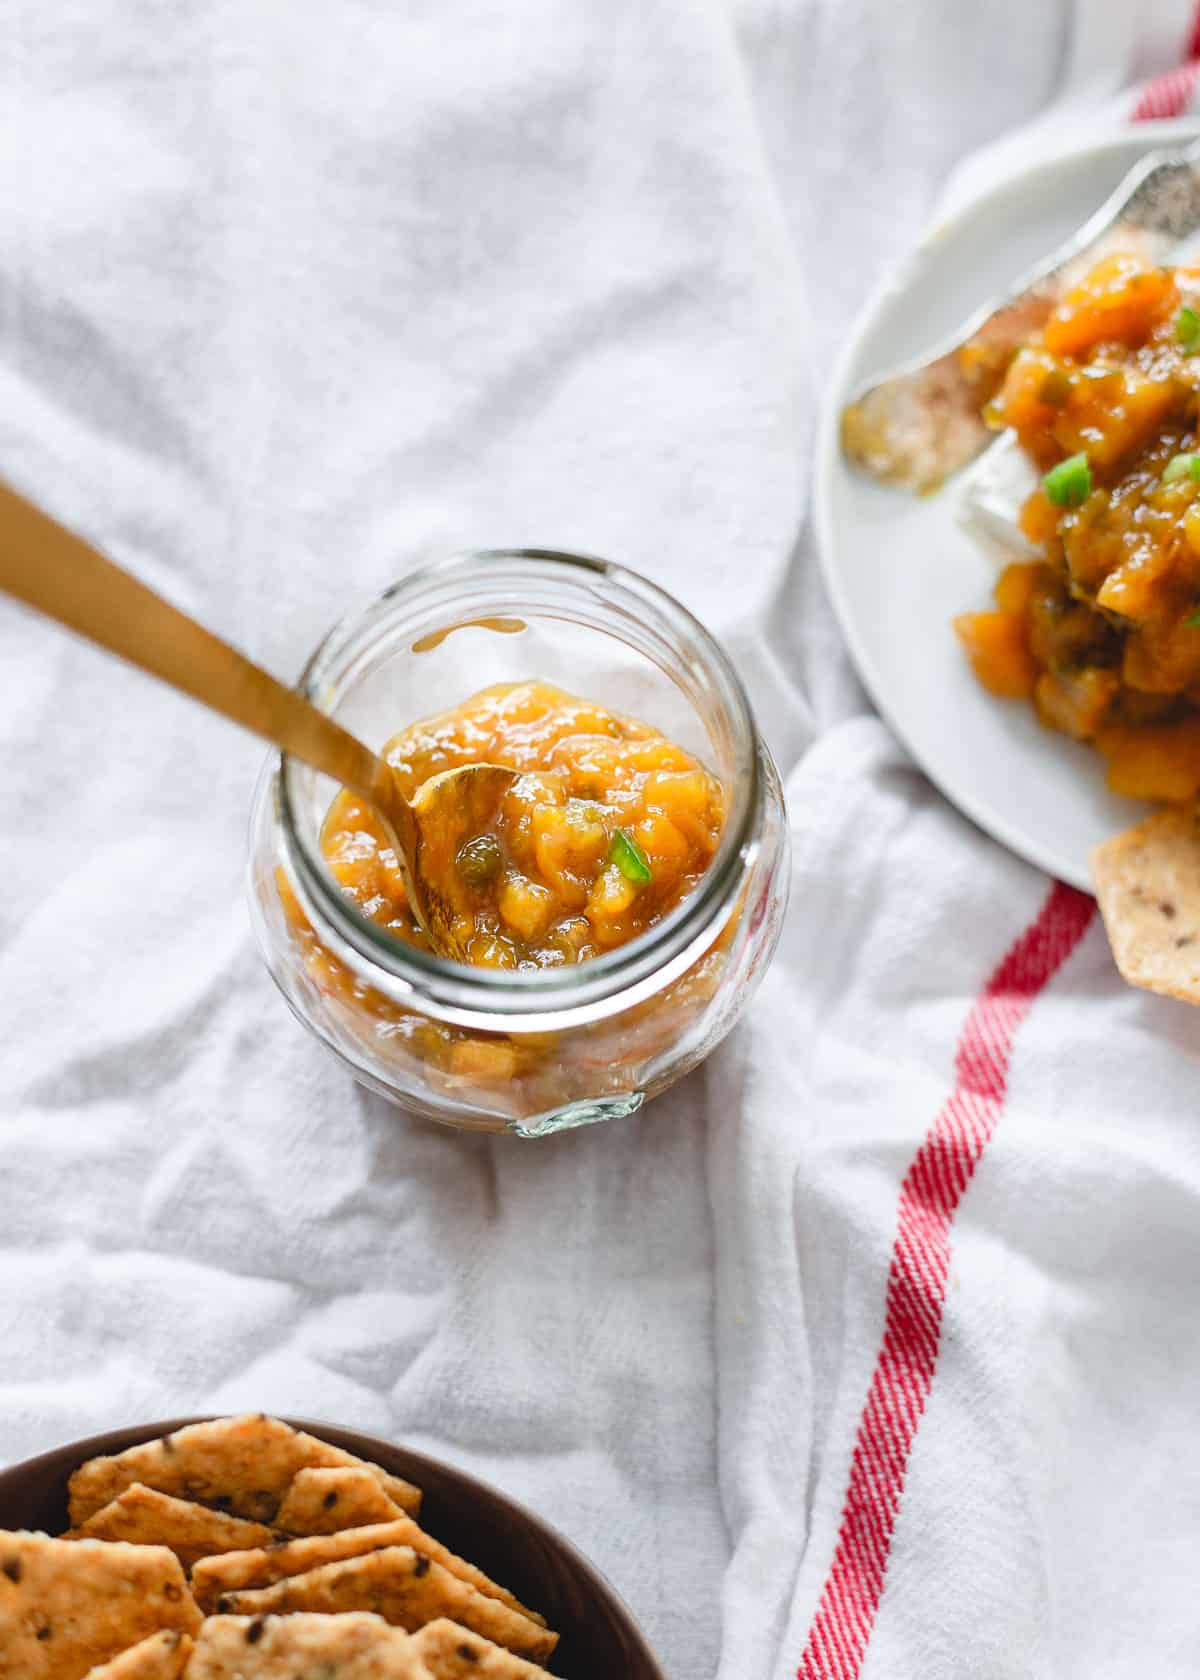 This jalapeno mango jam comes together in just minutes on your stove top and makes a versatile sweet or savory snack addition!